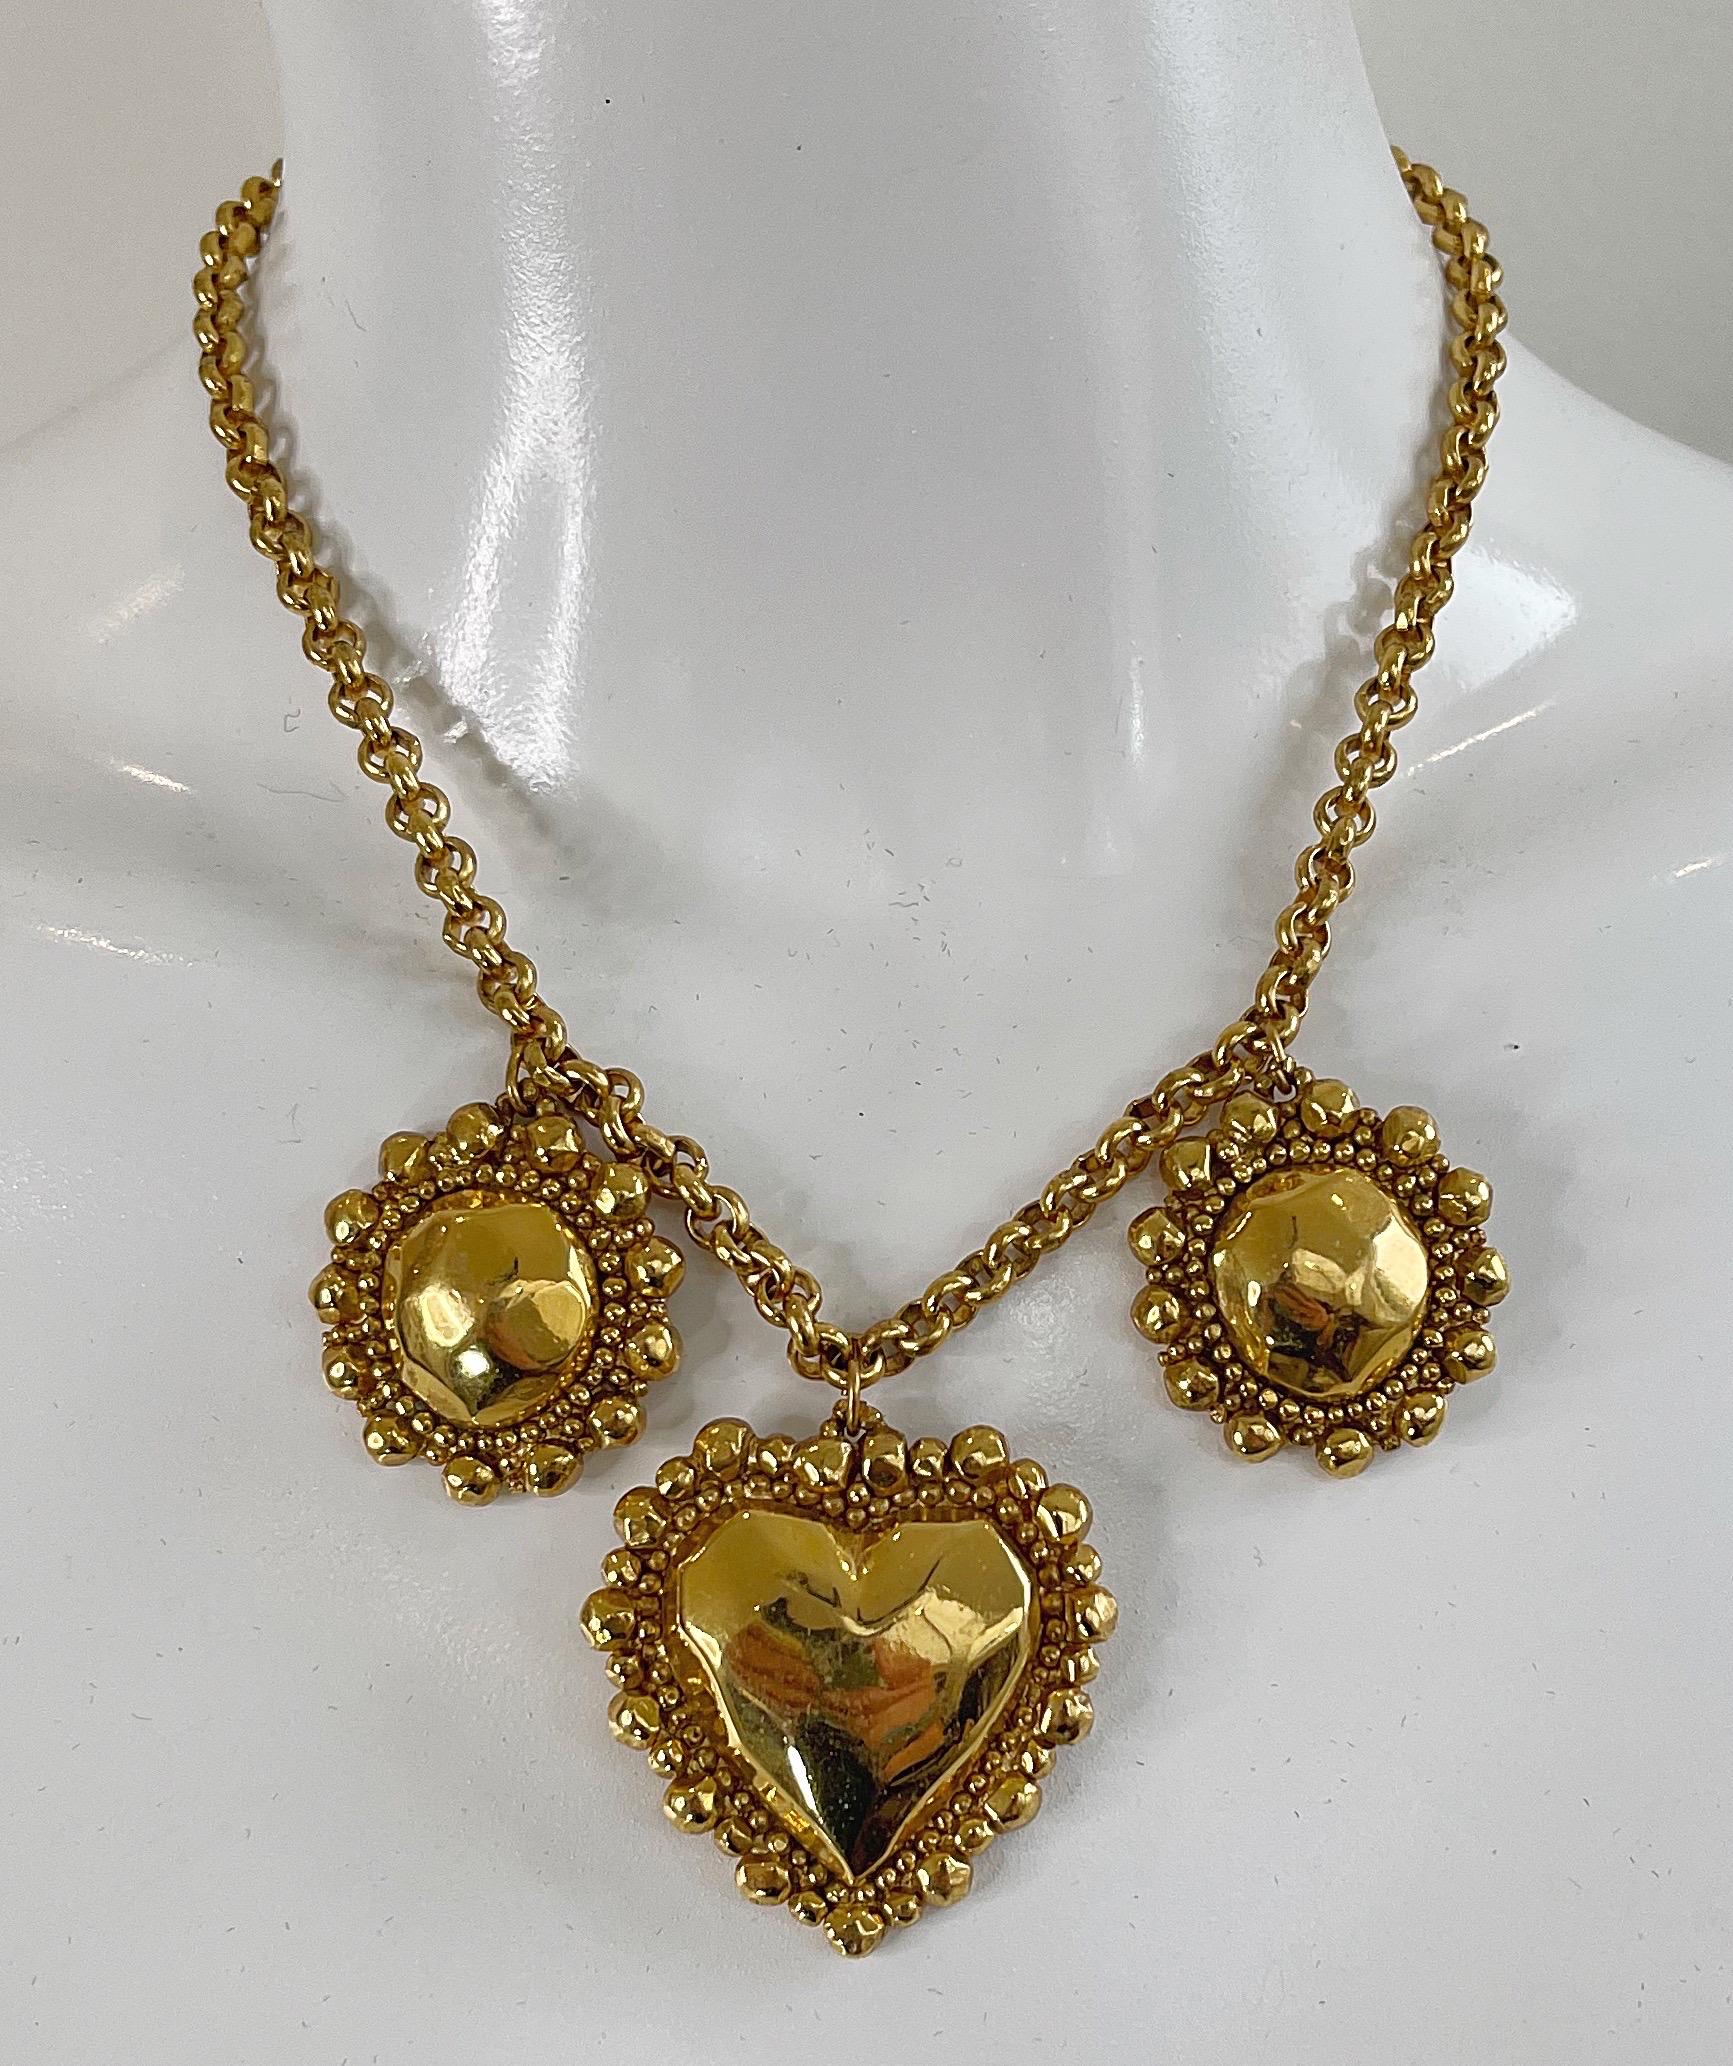  Valentine Day February 14 Chic 1990s EMANUEL UNGARO gold plated heart pendant necklace ! Center pendant is heart shaped with two round pendants on each side. 
Can easily be dressed up or down. Pair with jeans and a tank or a dress.
In great unworn